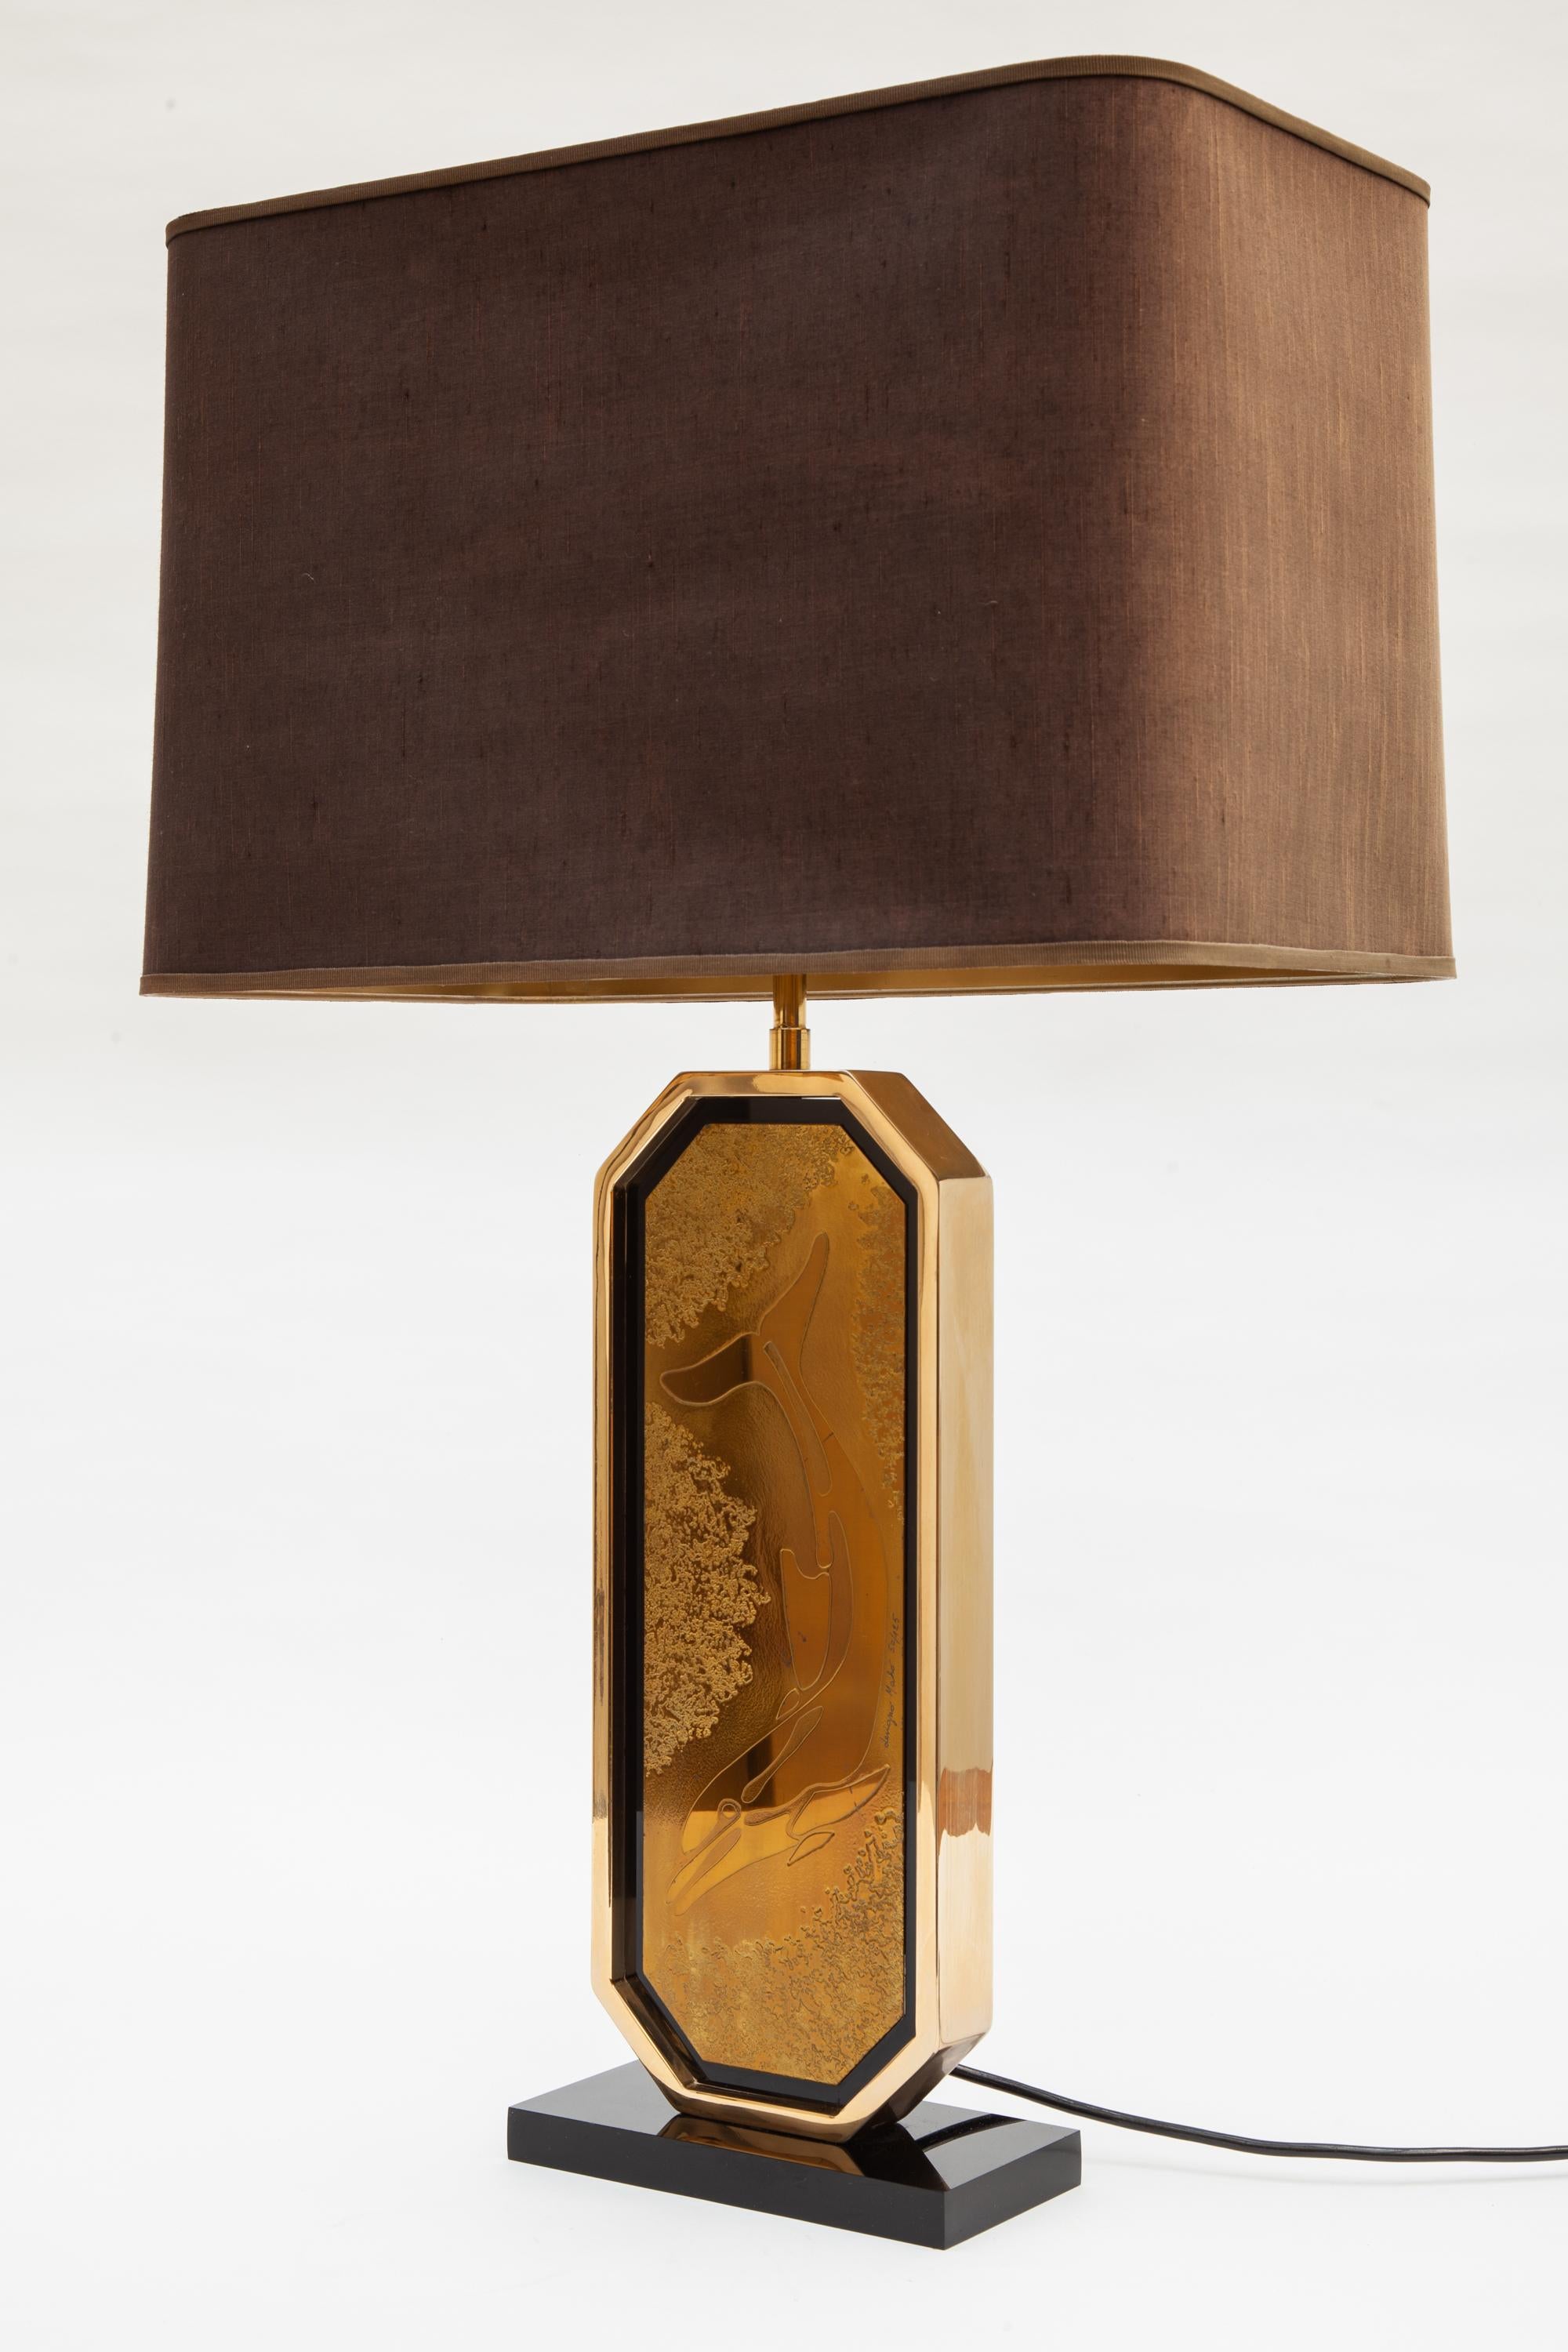 Vintage table lamp by Designo Mahó, Belgium. Gold base with black Lucite accents.
Features a dolphin etching by artist Georges Mathias, signed and numbered 50/125. Raw silk shade with adjustable height. Holds two bulbs.

Measures: 20 W x 9 D x 75